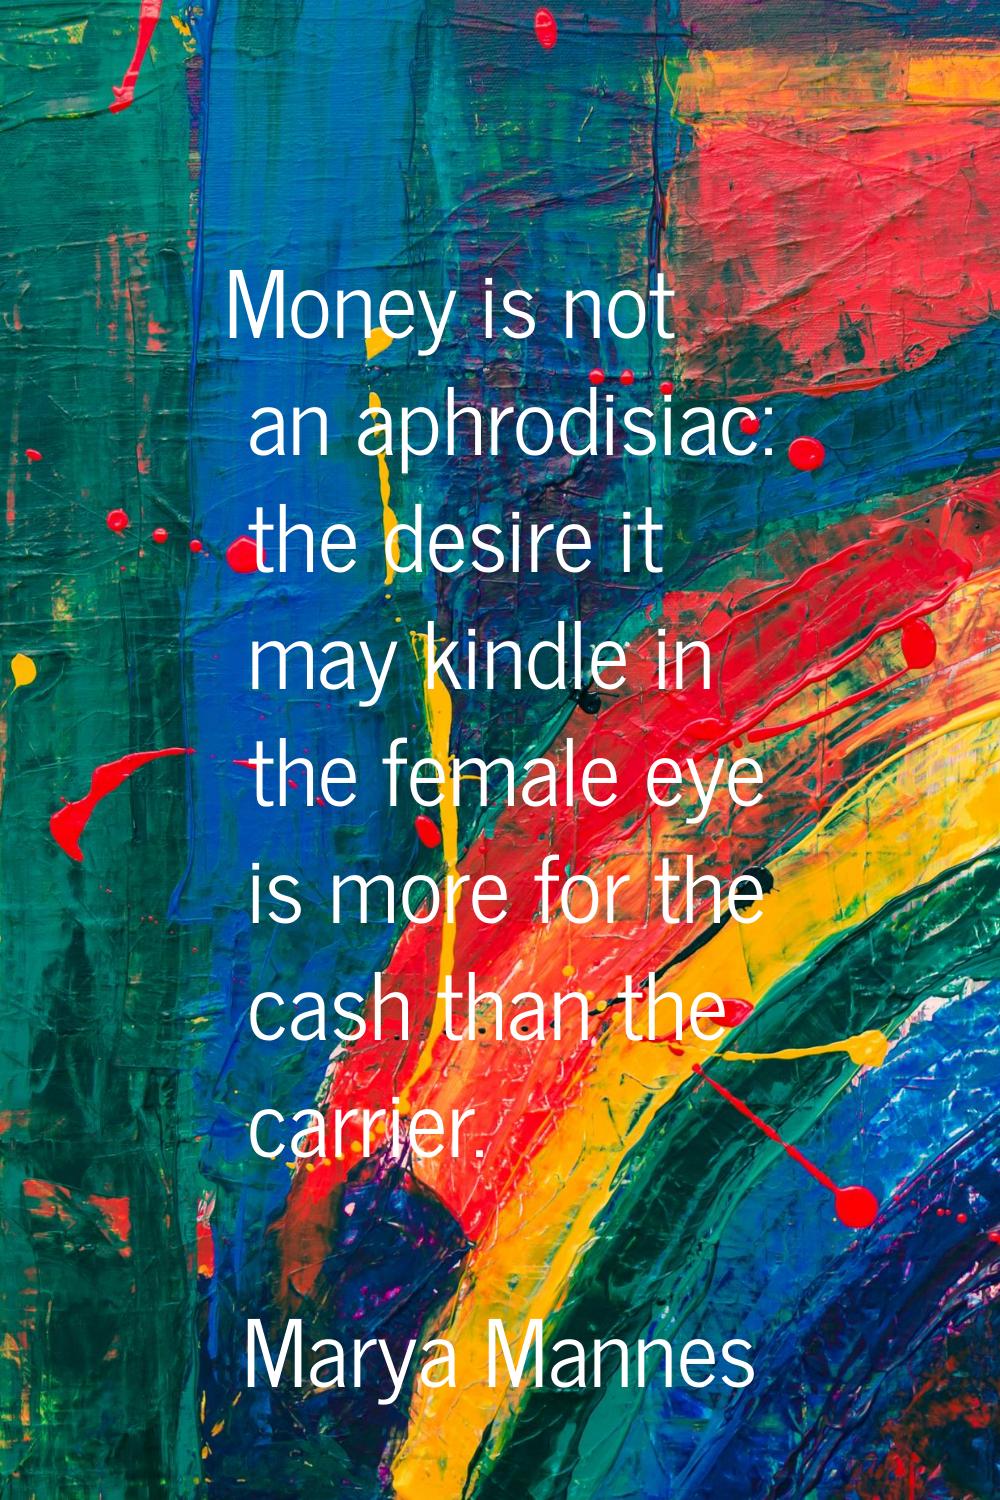 Money is not an aphrodisiac: the desire it may kindle in the female eye is more for the cash than t